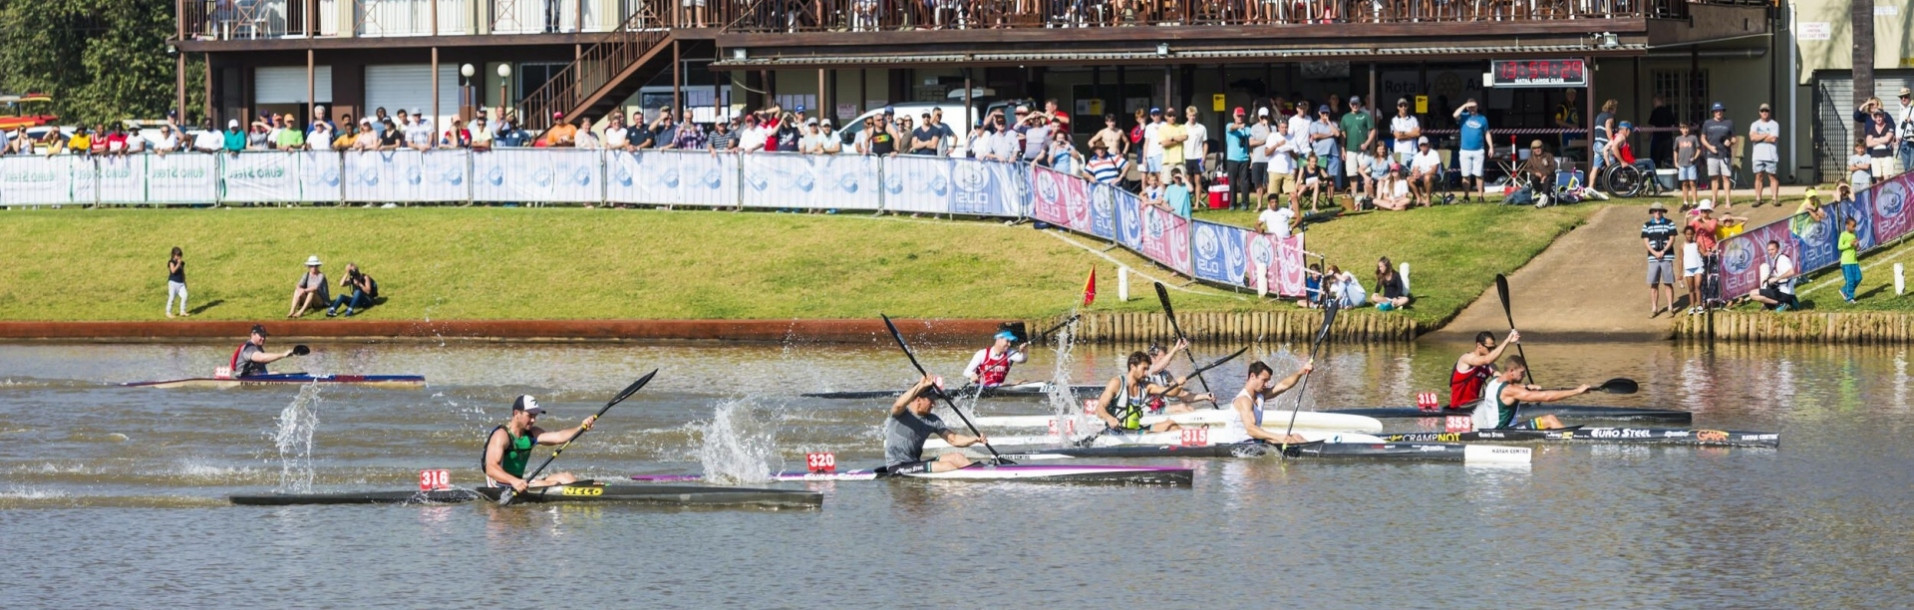 South Africa are hosting the Championships for the second time ©ICF